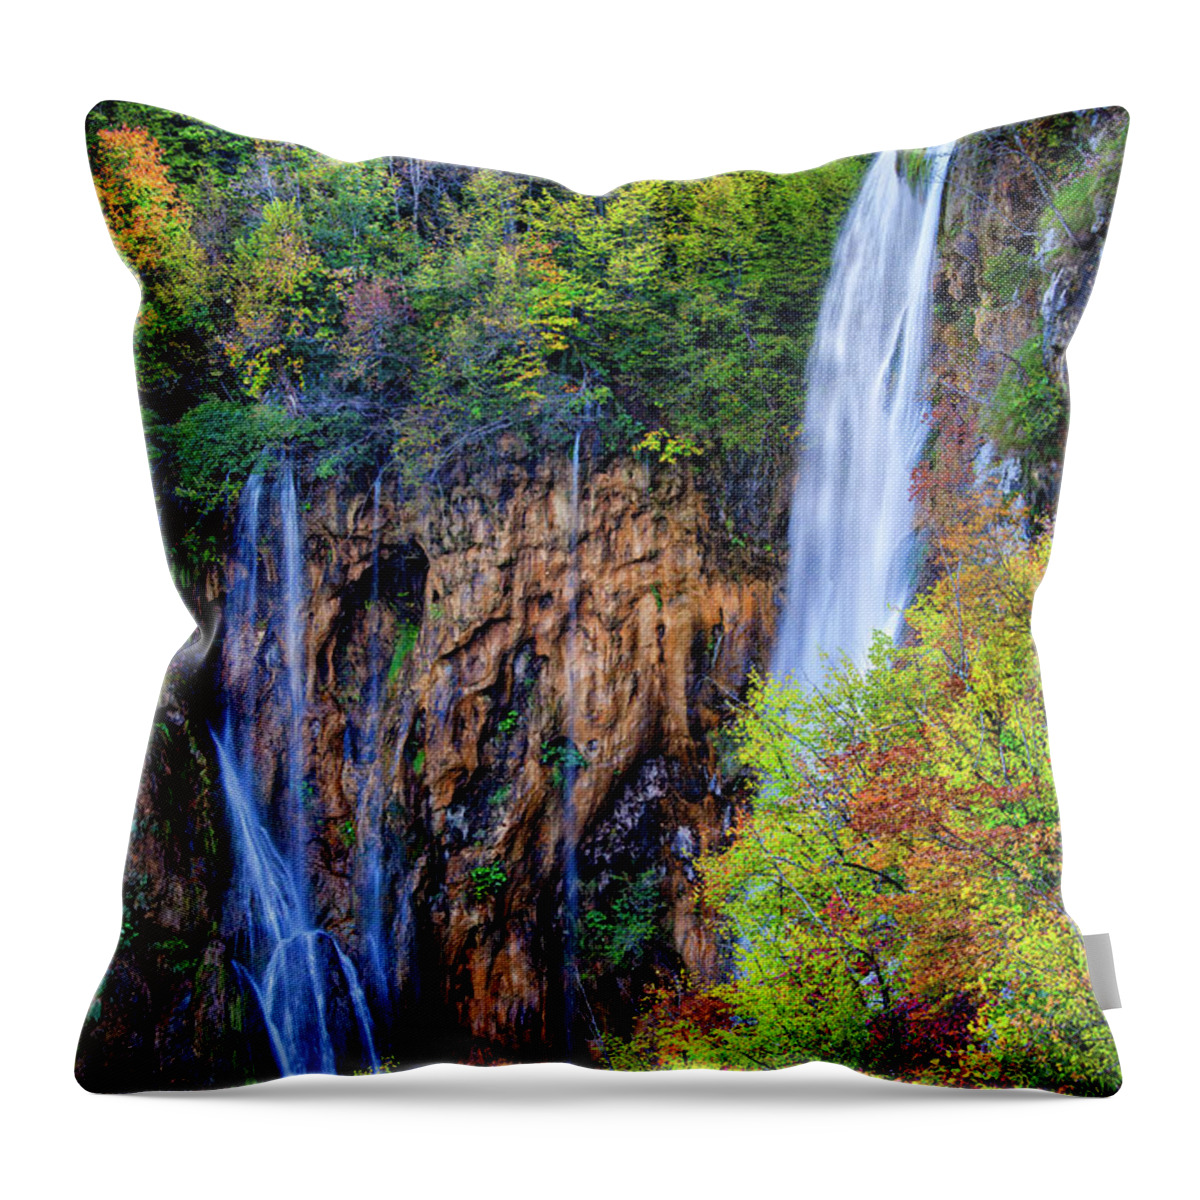 Waterfall Throw Pillow featuring the photograph Plitvice Lakes National Park Waterfall by Artur Bogacki